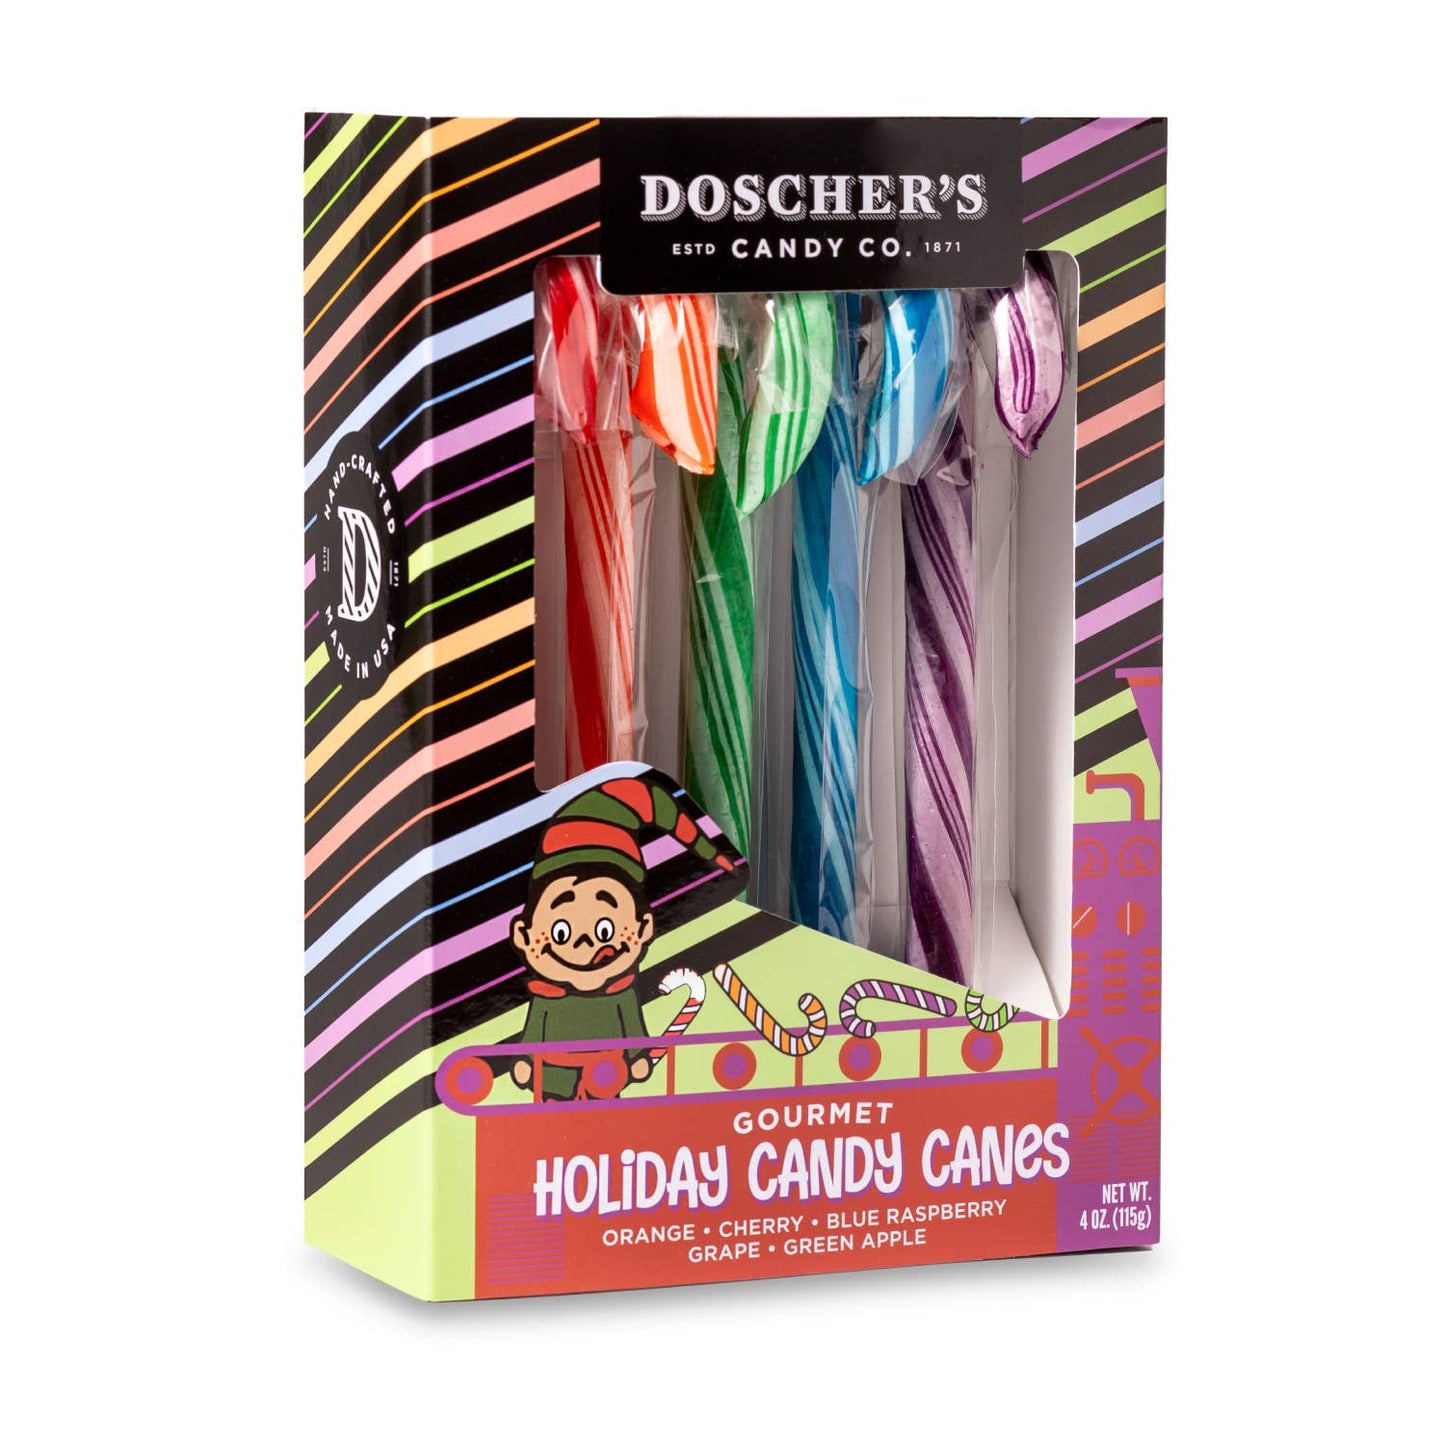 Doscher's Famous Elf Collection Candy Canes